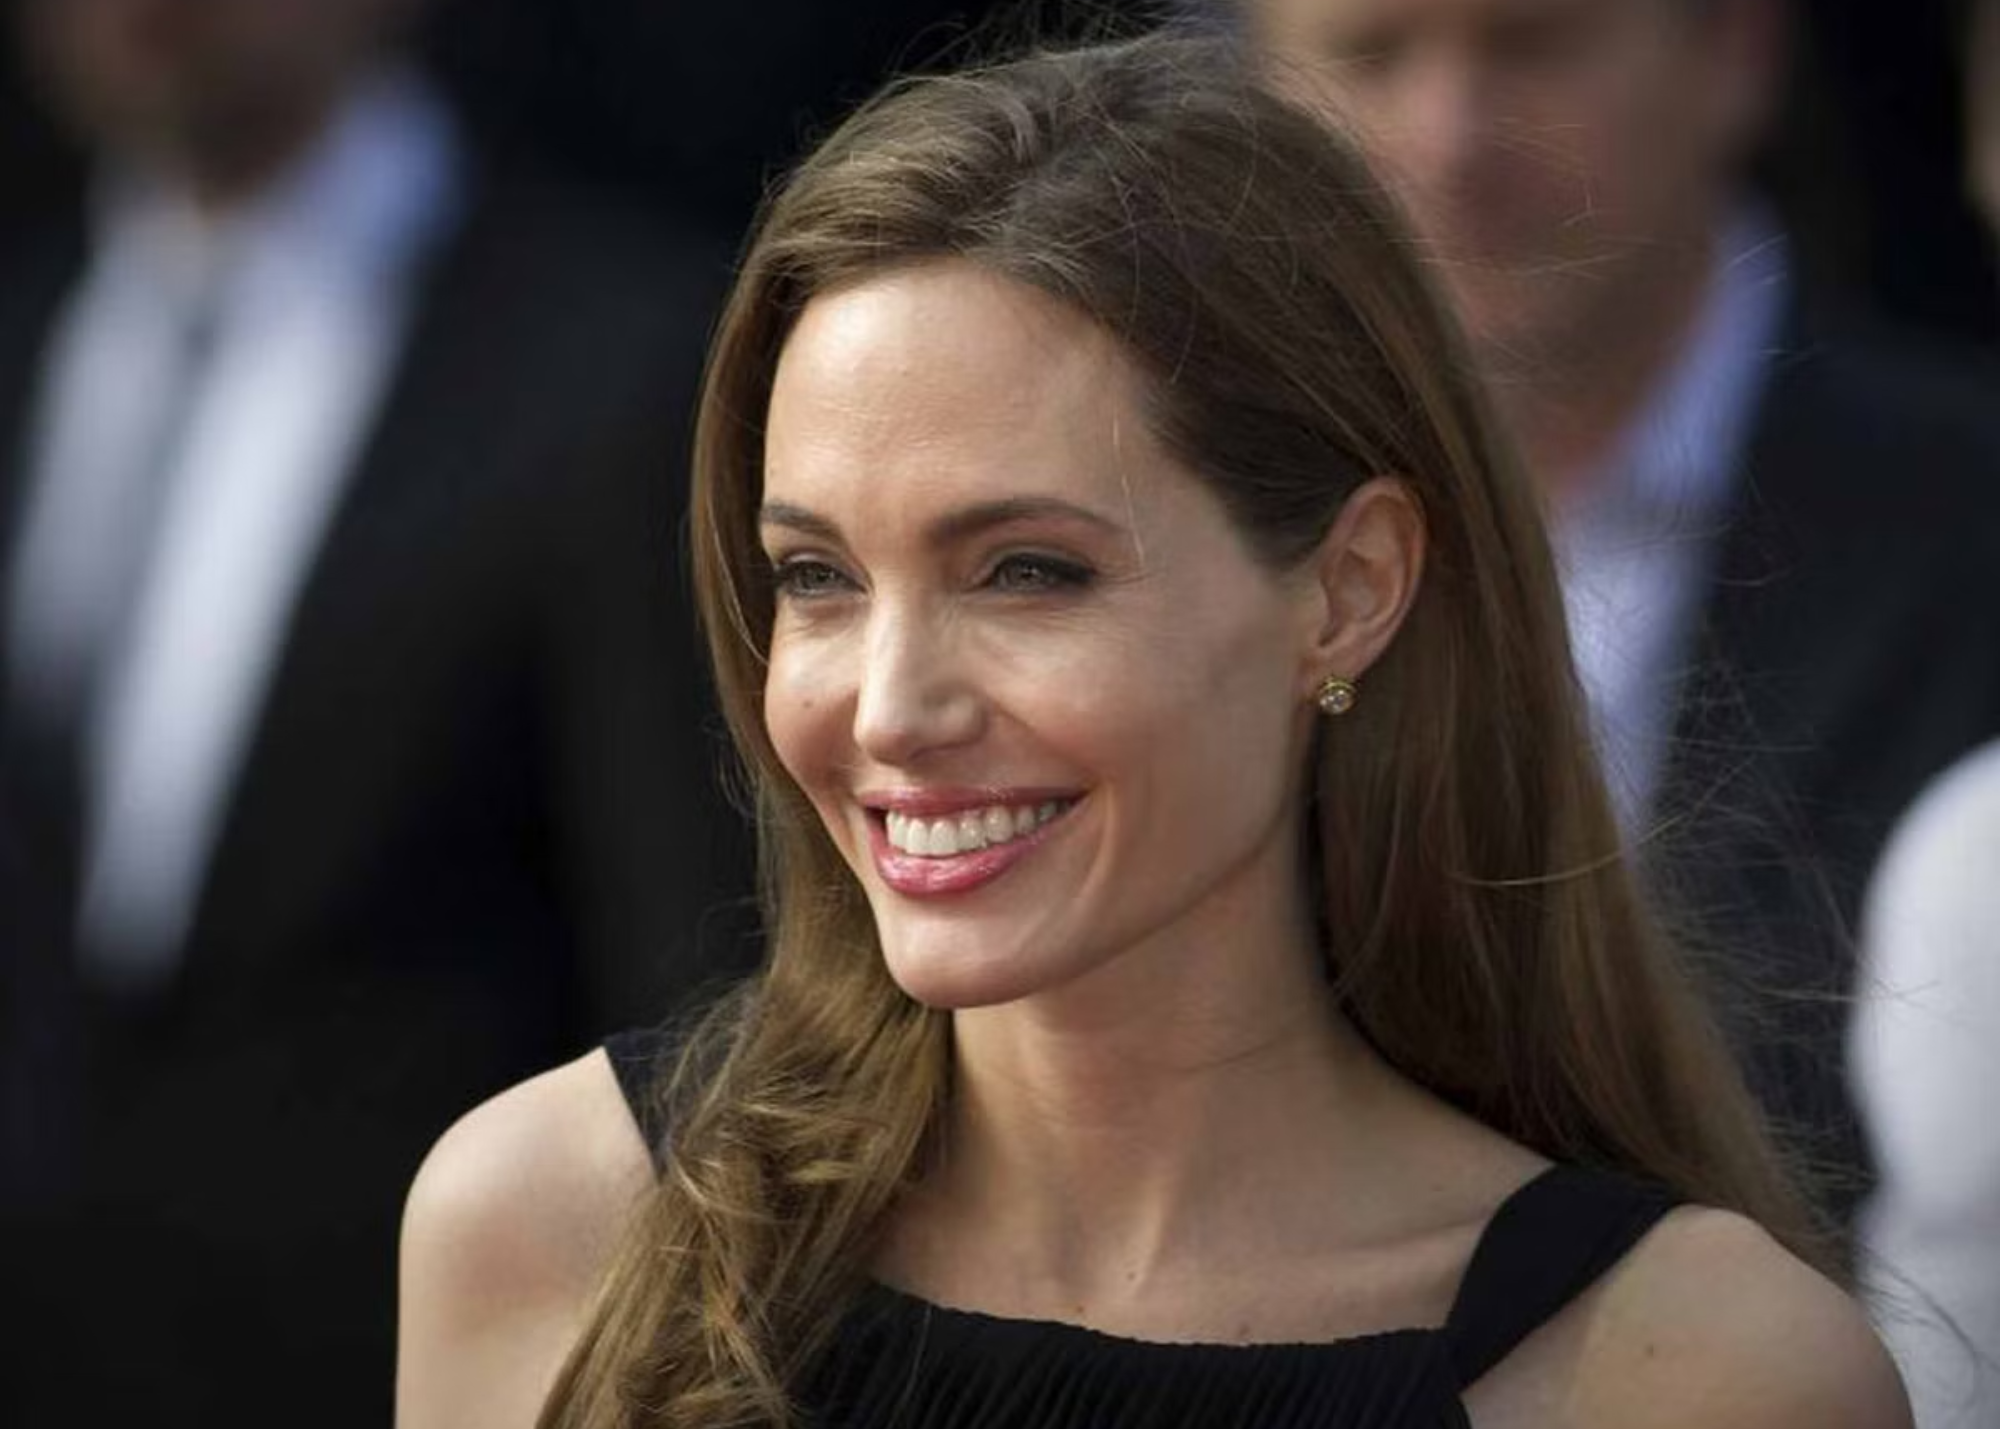 Angelina Jolie Implants - Preventive Mastectomy And Breast Reconstruction